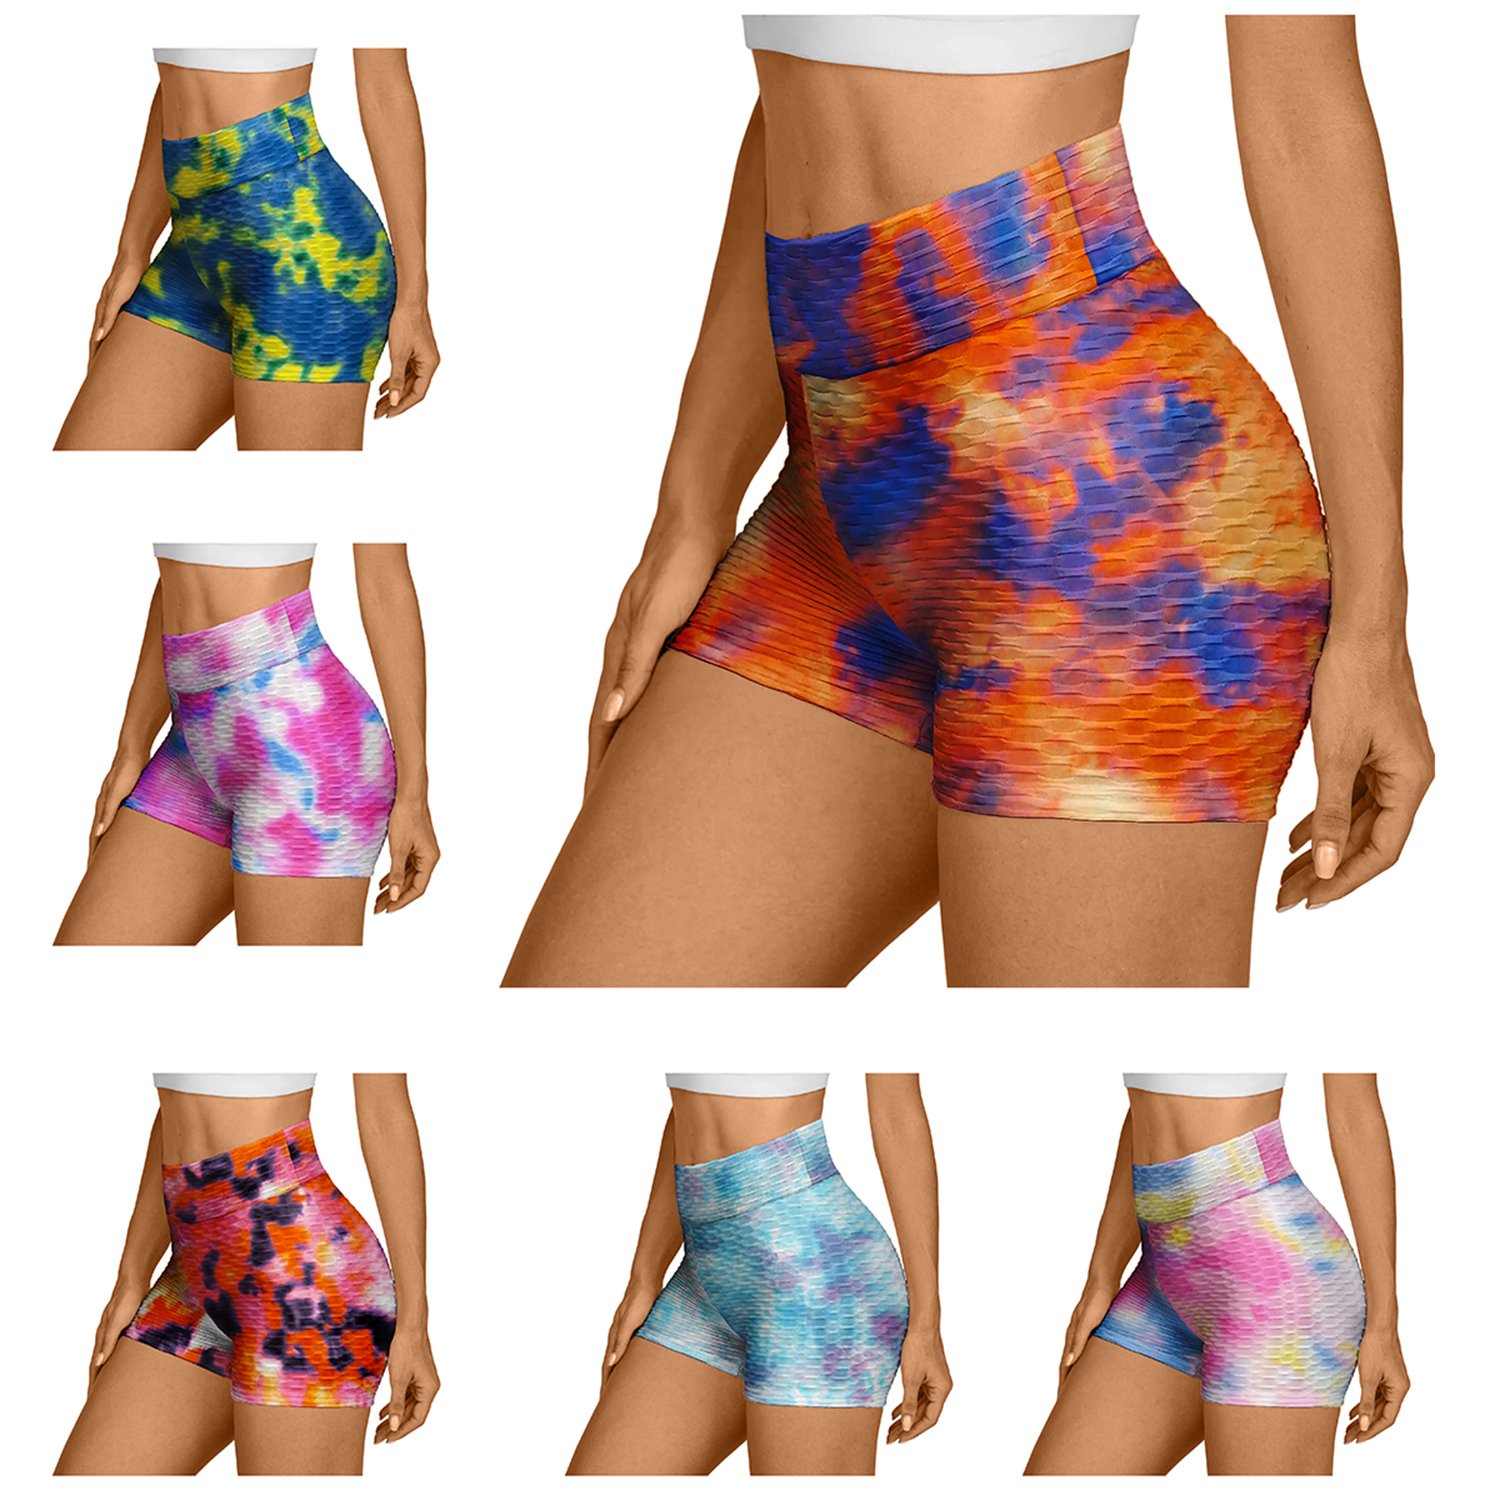 5-Pack Women's High Waisted Anti-Cellulite Tie-dye Workout Biker Shorts - S